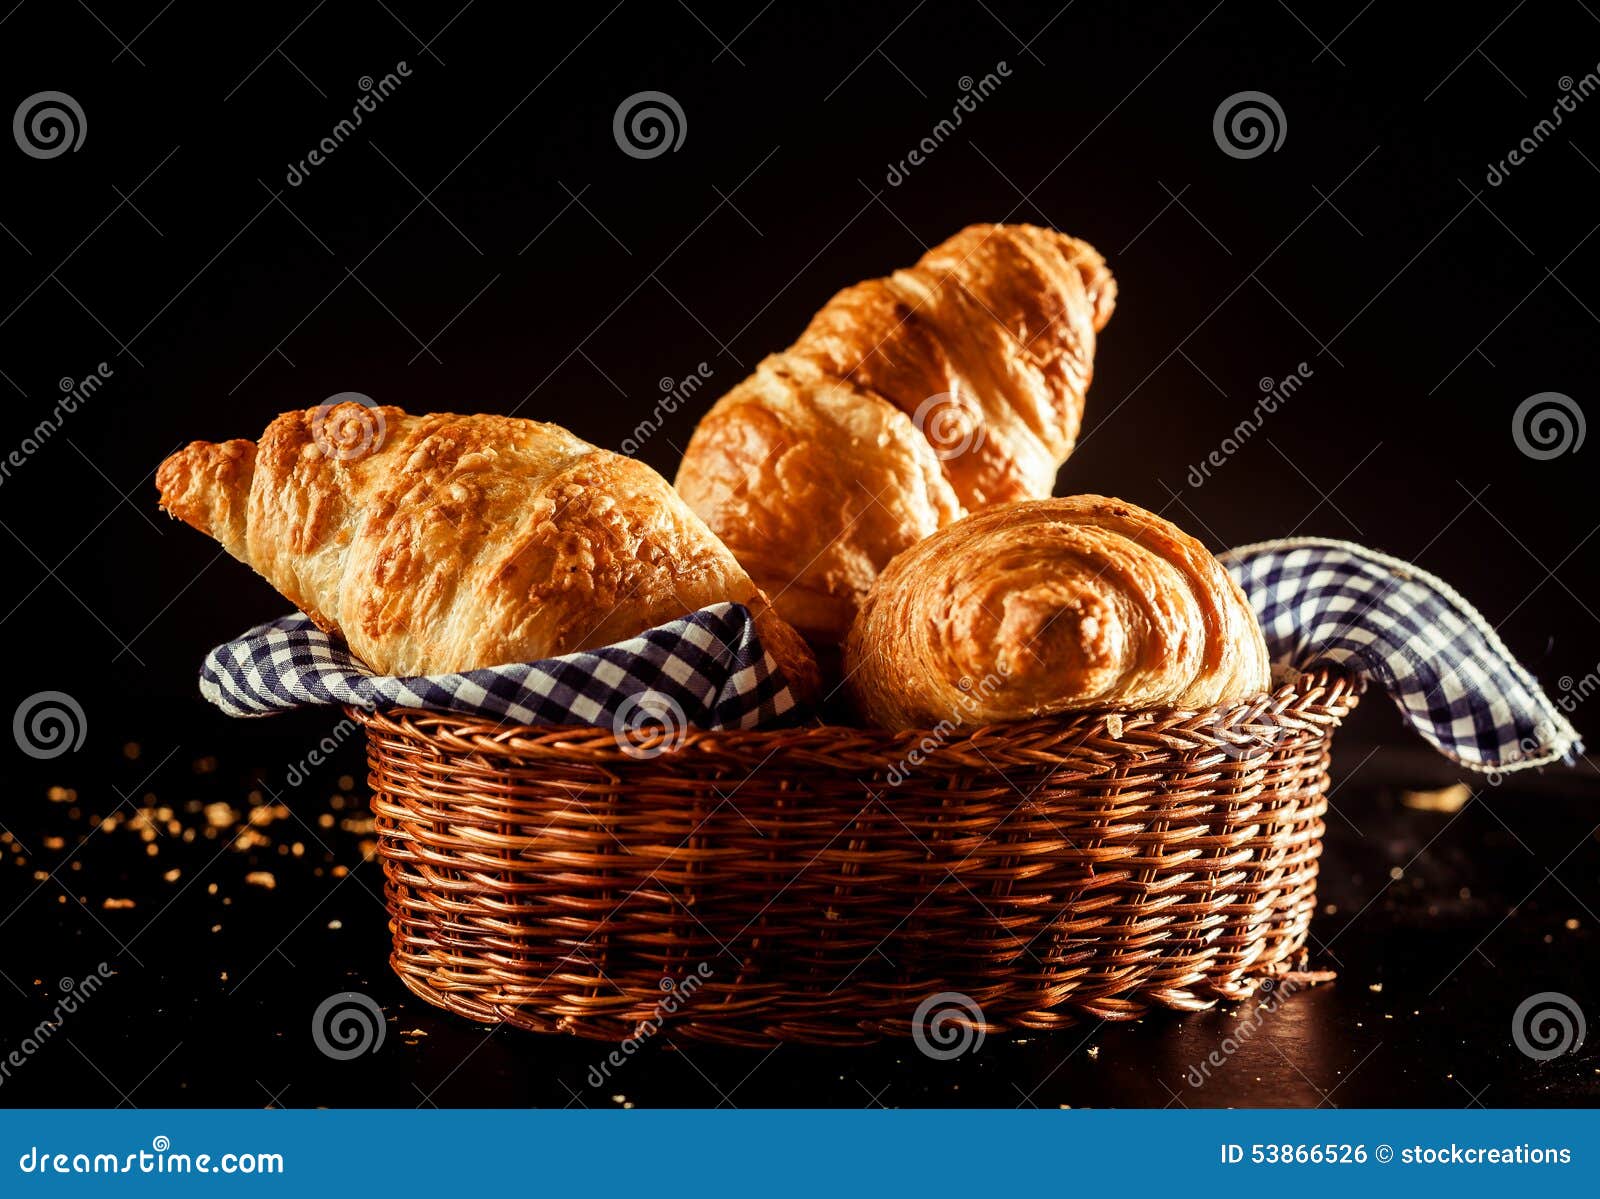 buttery and flaky croissant on a basket on a table